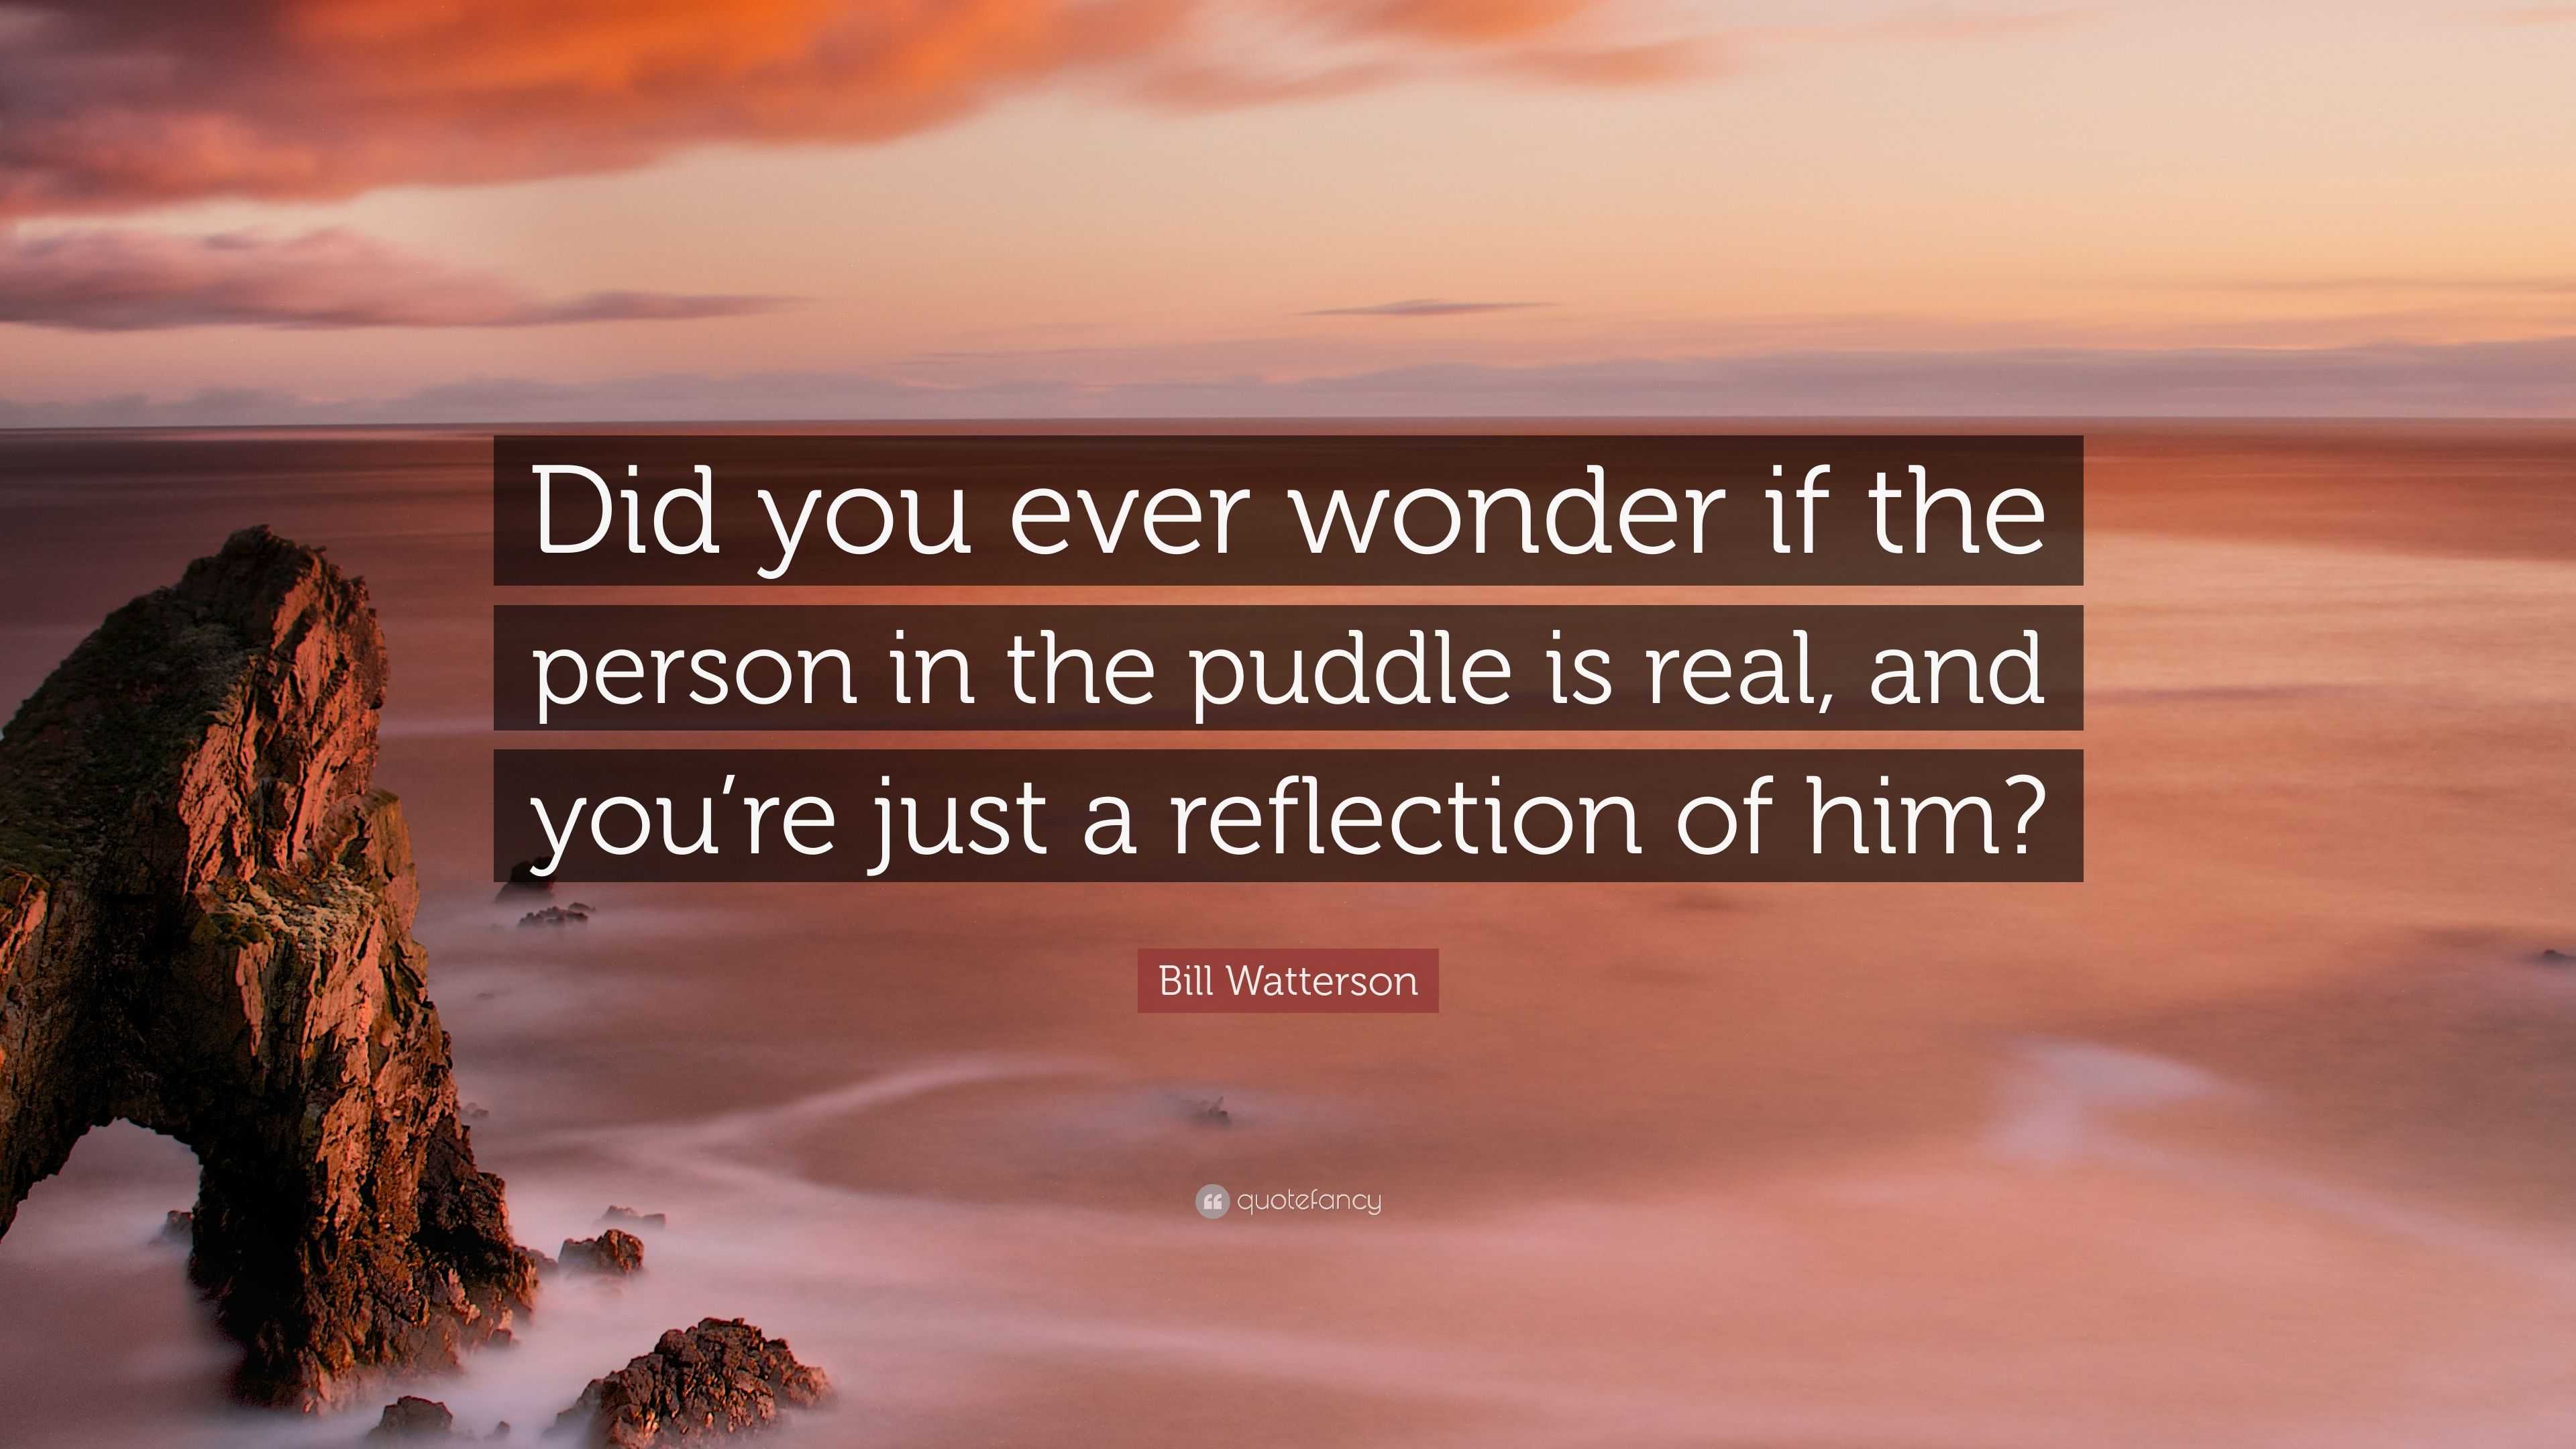 Bill Watterson Quote: “Did you ever wonder if the person in the puddle ...